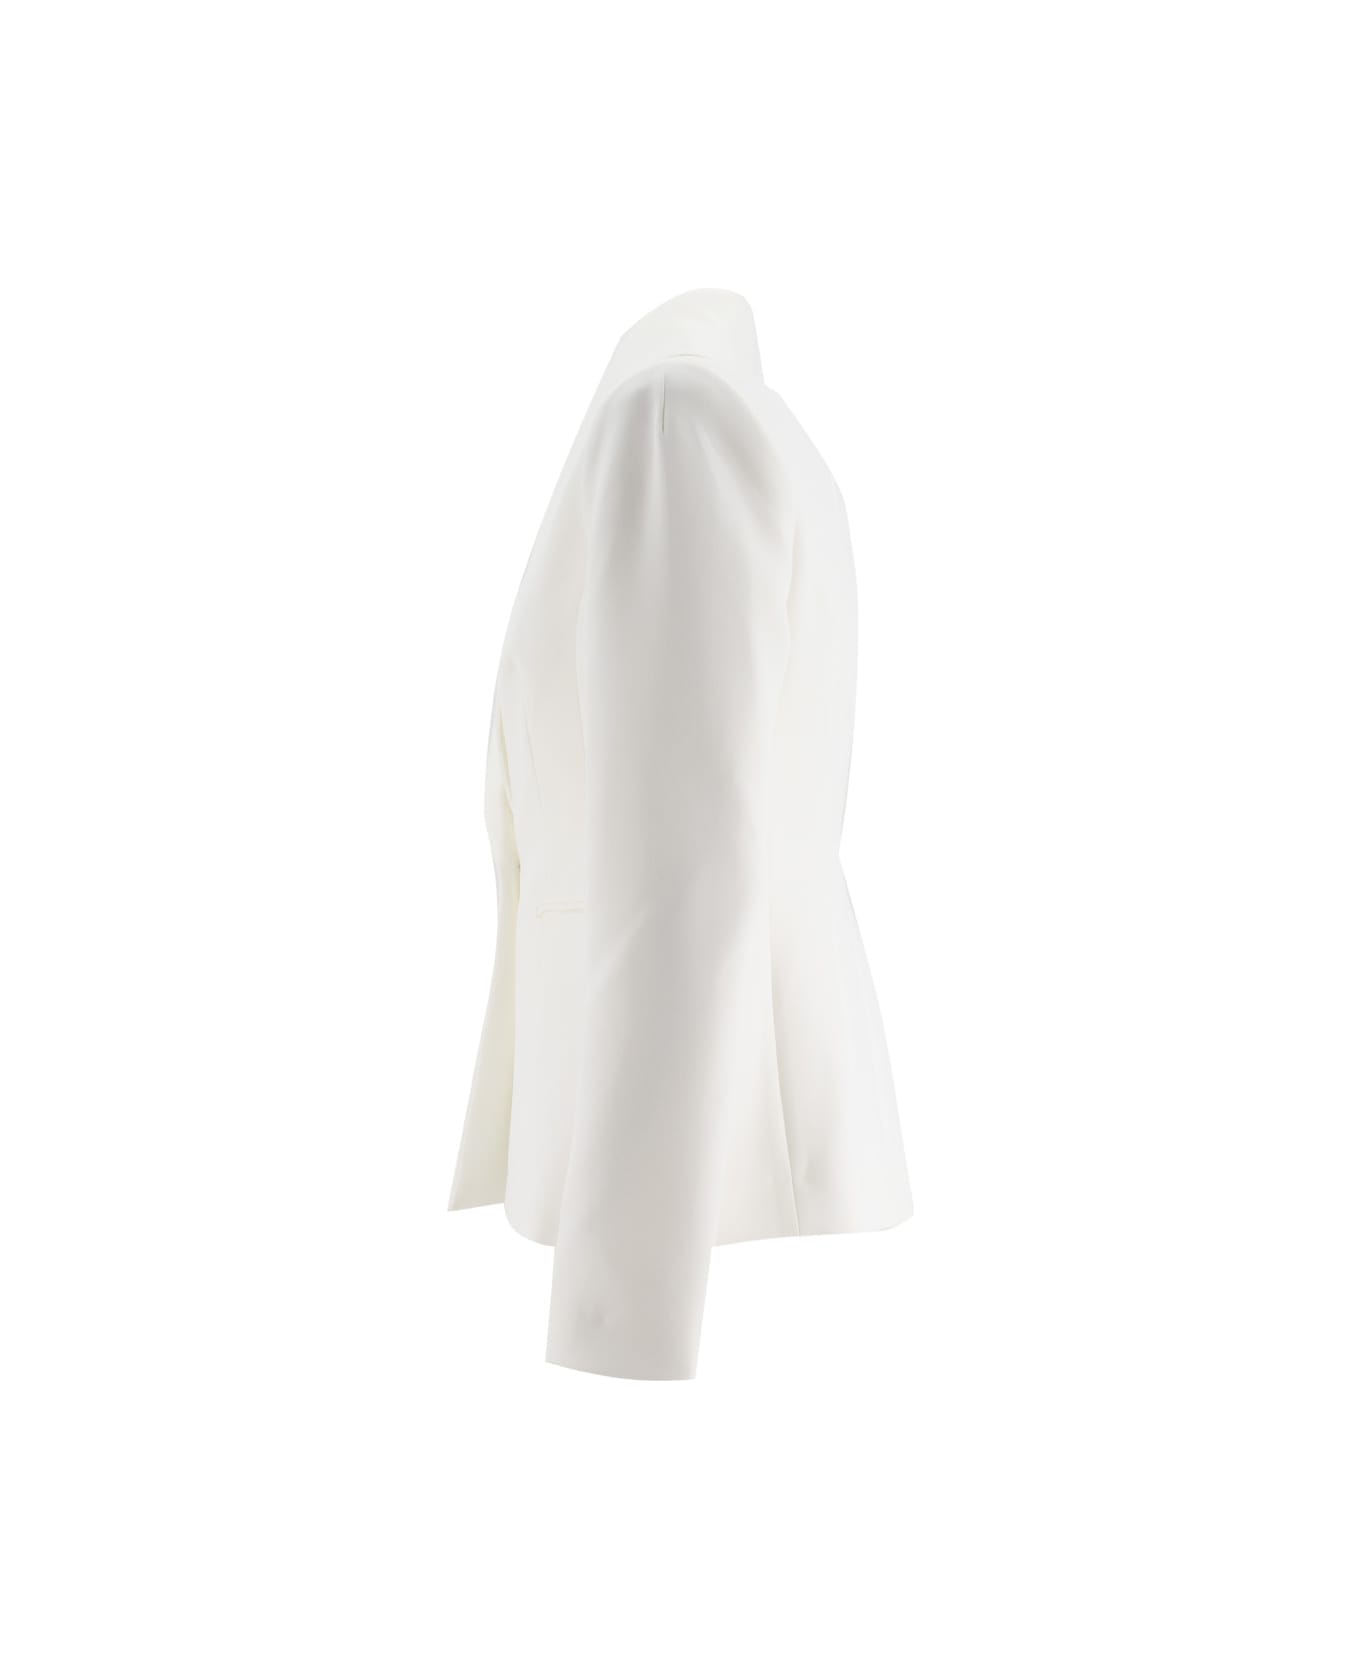 Ermanno Firenze Jacket - OFF WHITE/OFF WHITE ブレザー